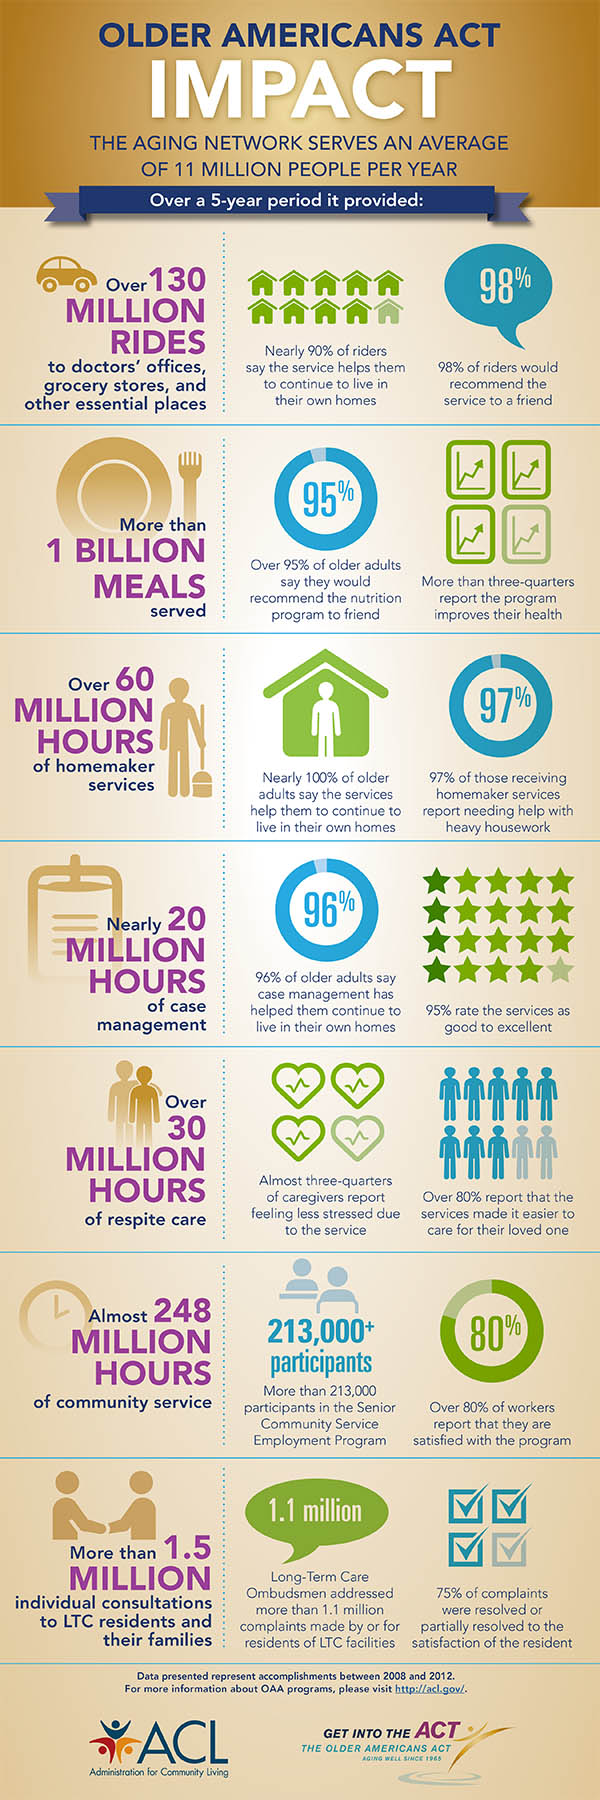 Infographic on the impact of The Older Americans Act.